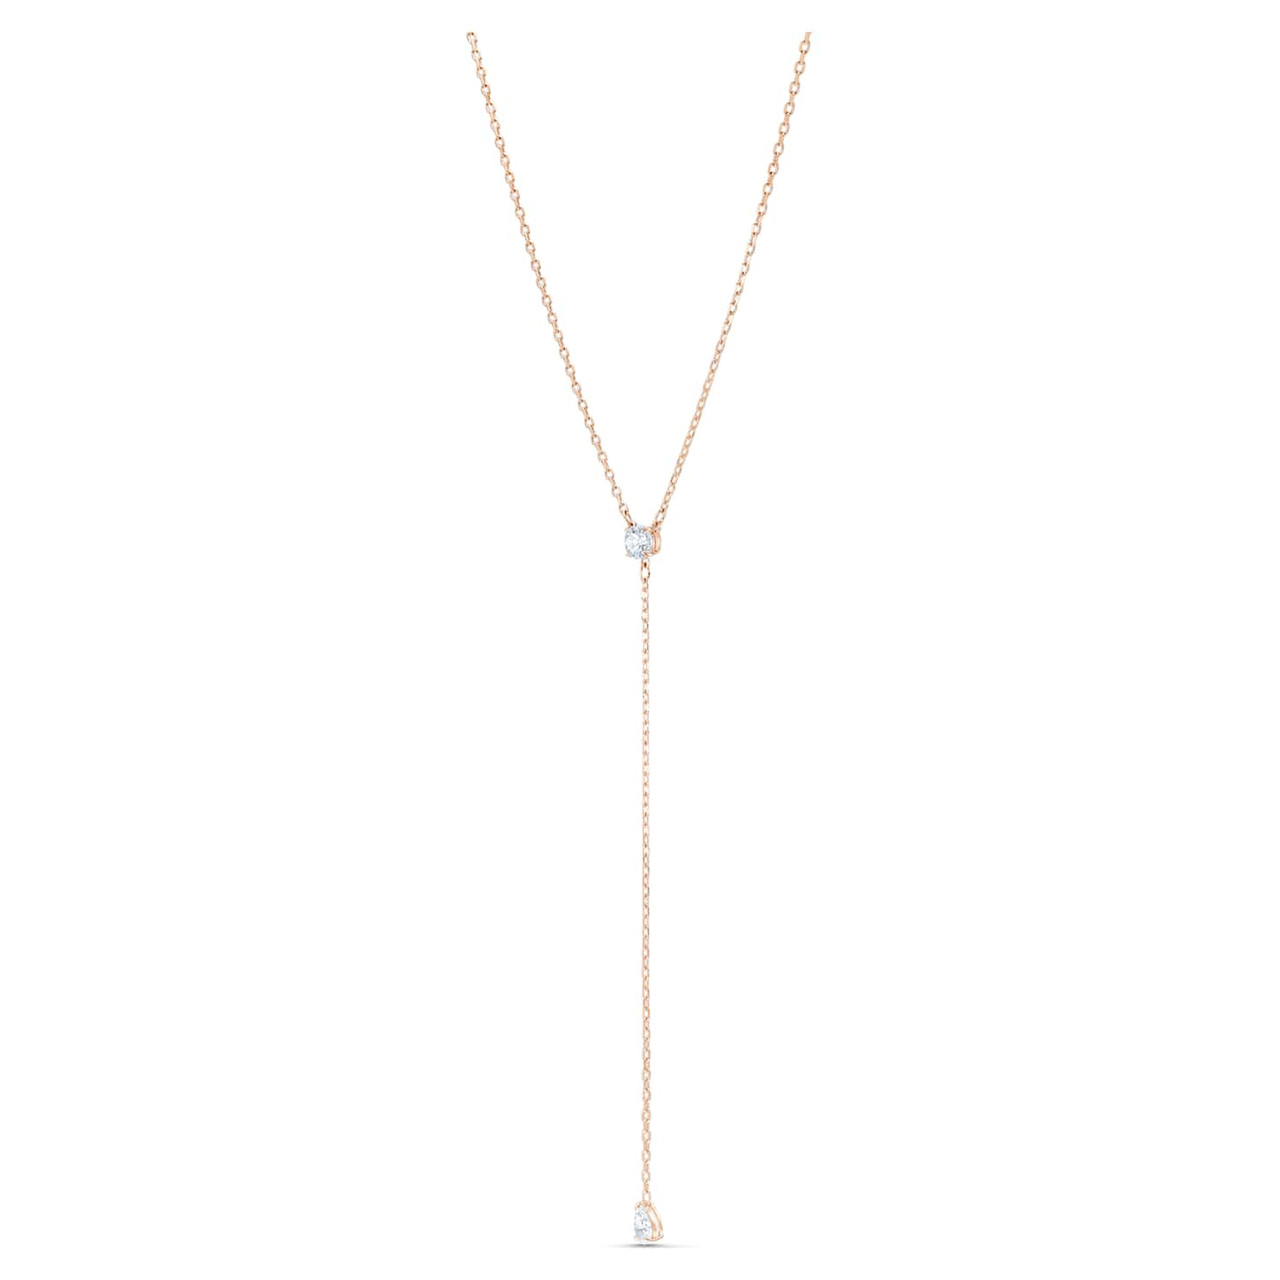 Swarovski Crystal Attract Soul Y Necklace, White, Rose-Gold Tone